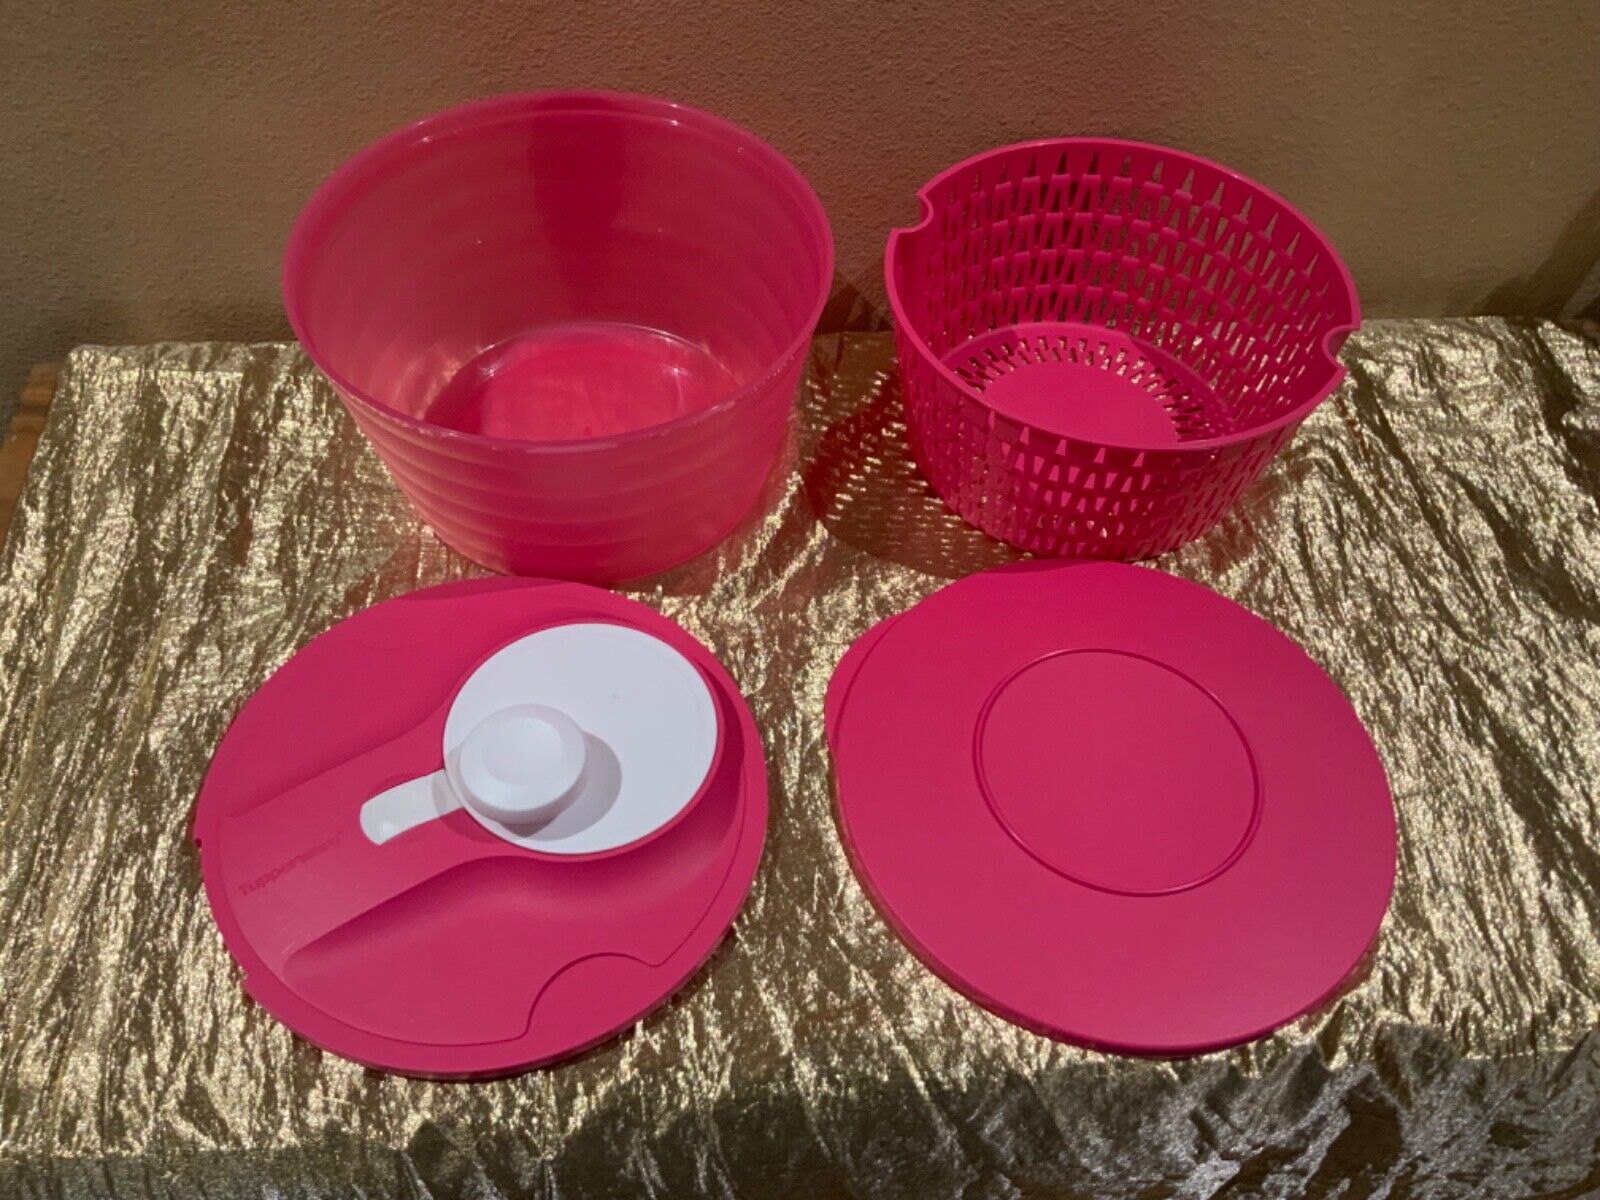 Tupperware New Beautiful Spin N Save Salad Spinner Strainer 4.5L Fiusha Color